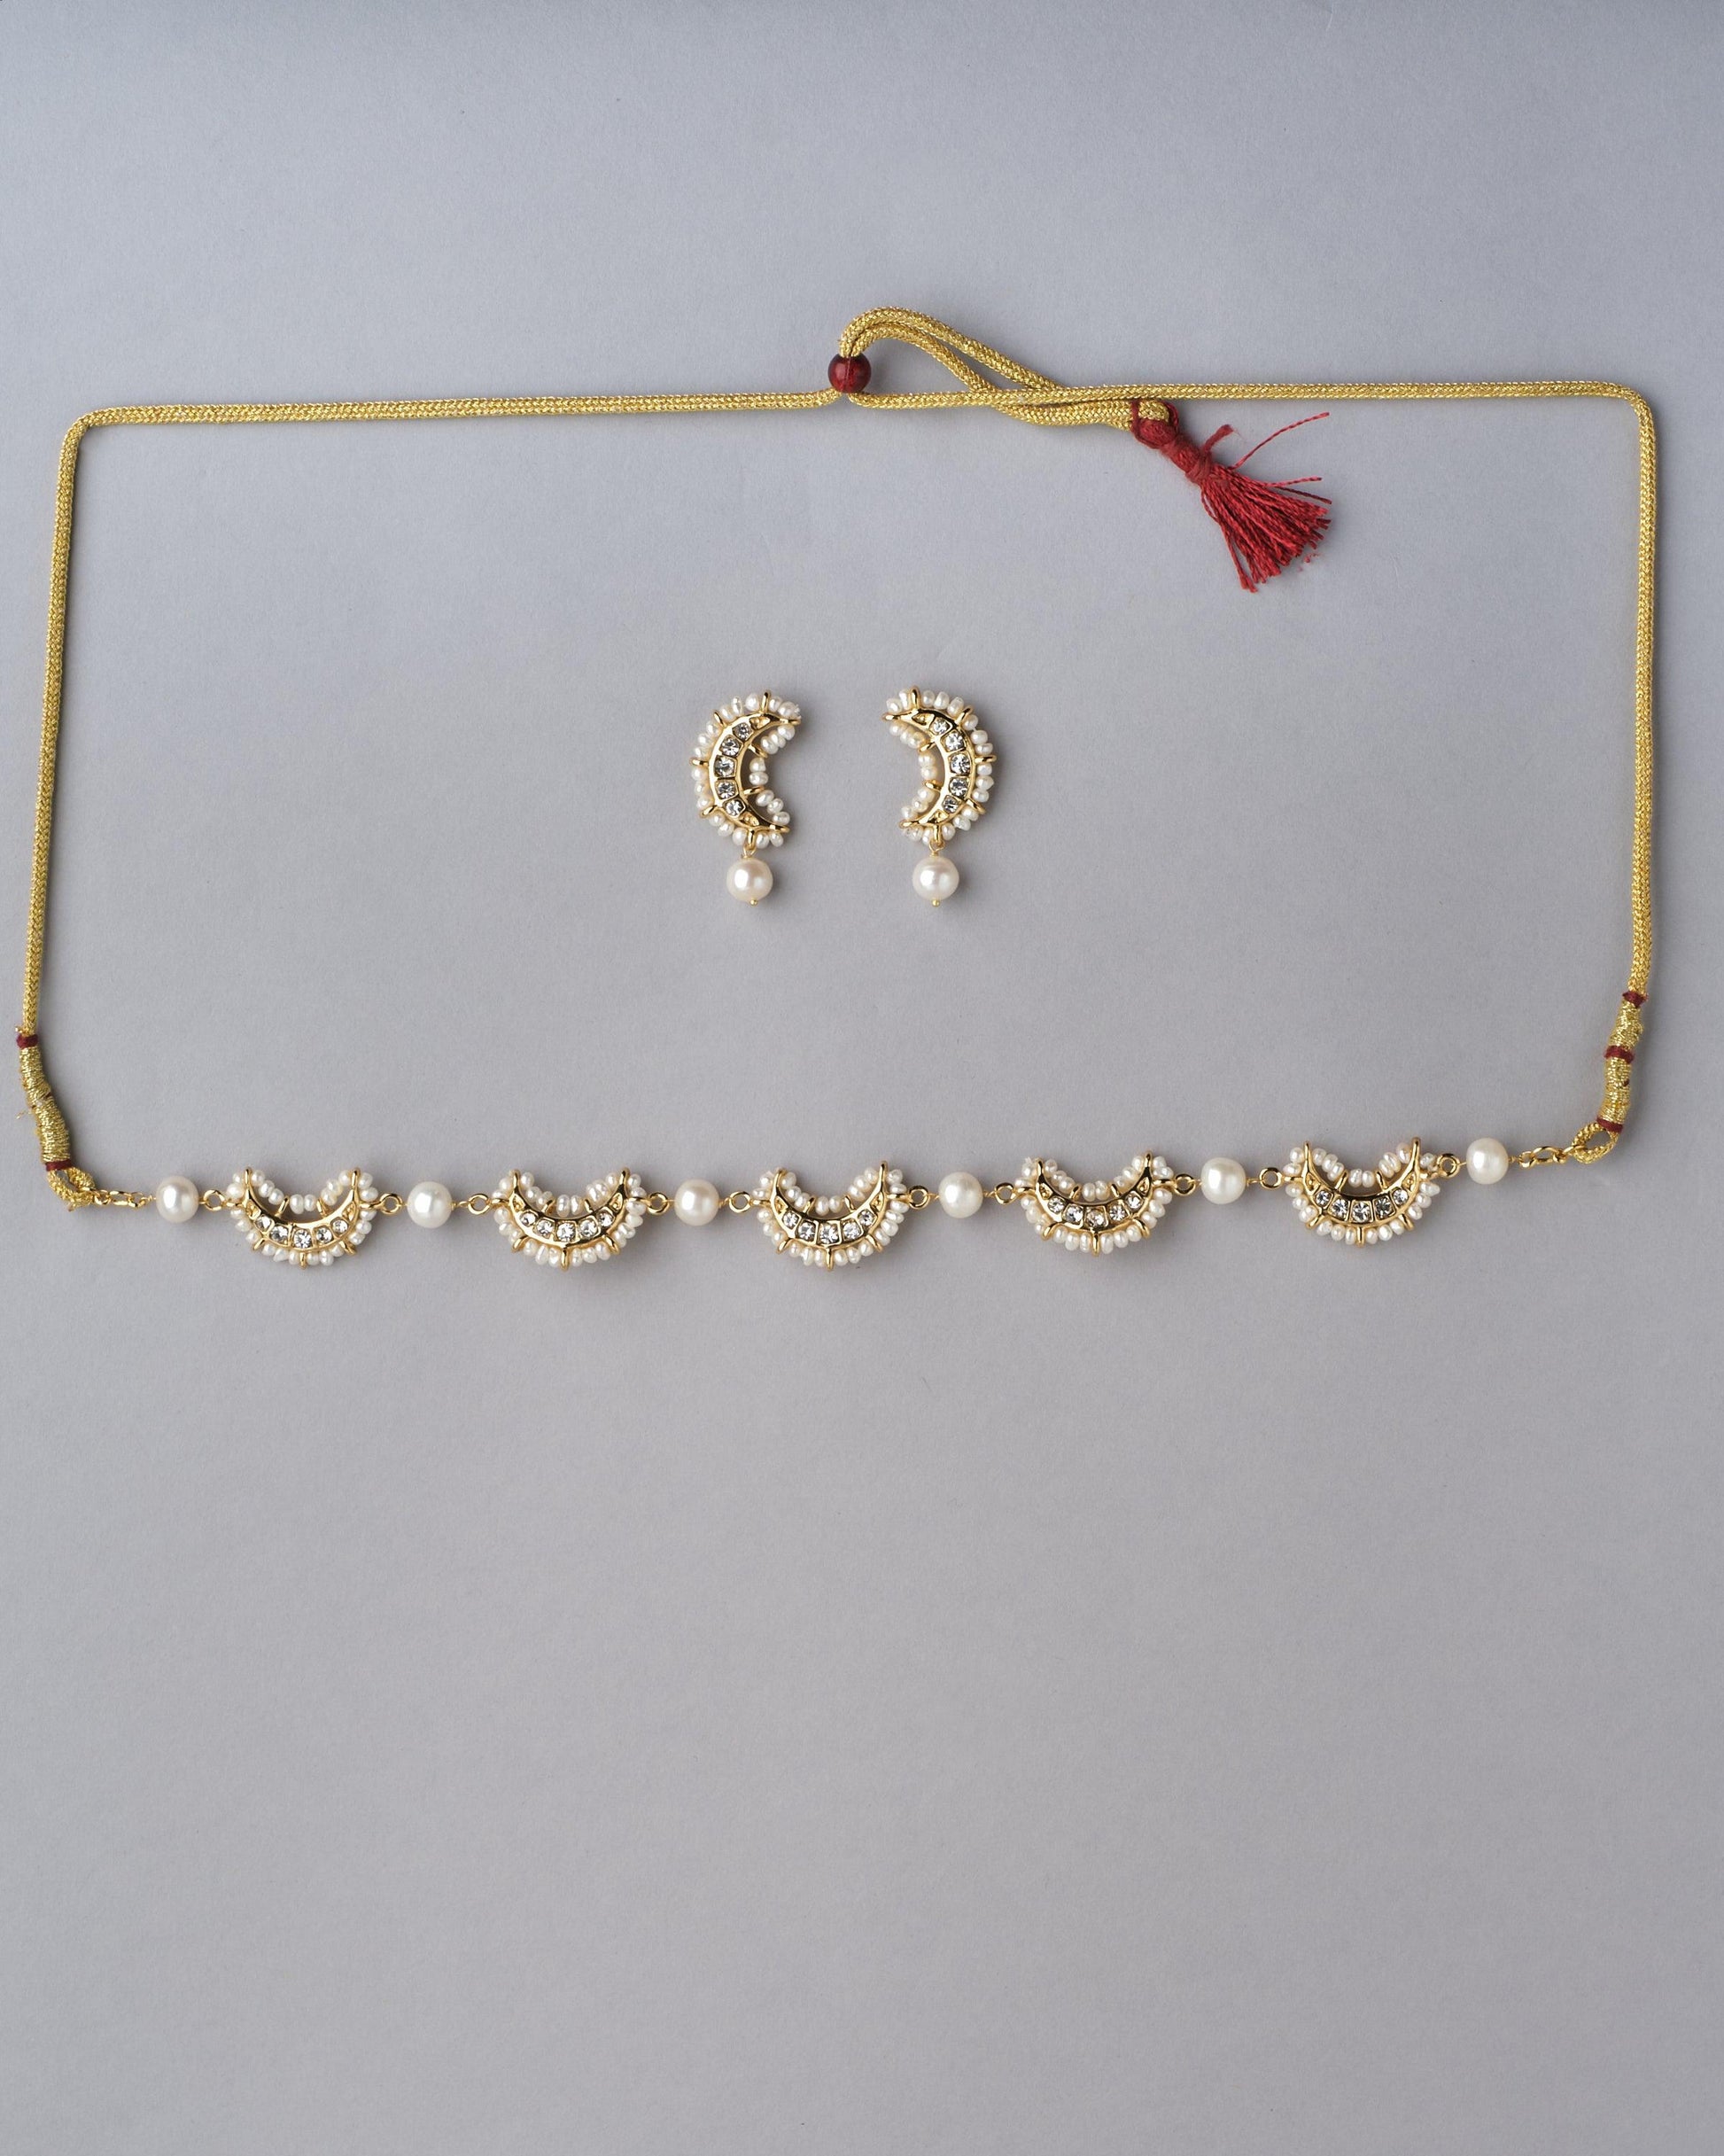 Delightful Pearl Necklace Sets - Chandrani Pearls